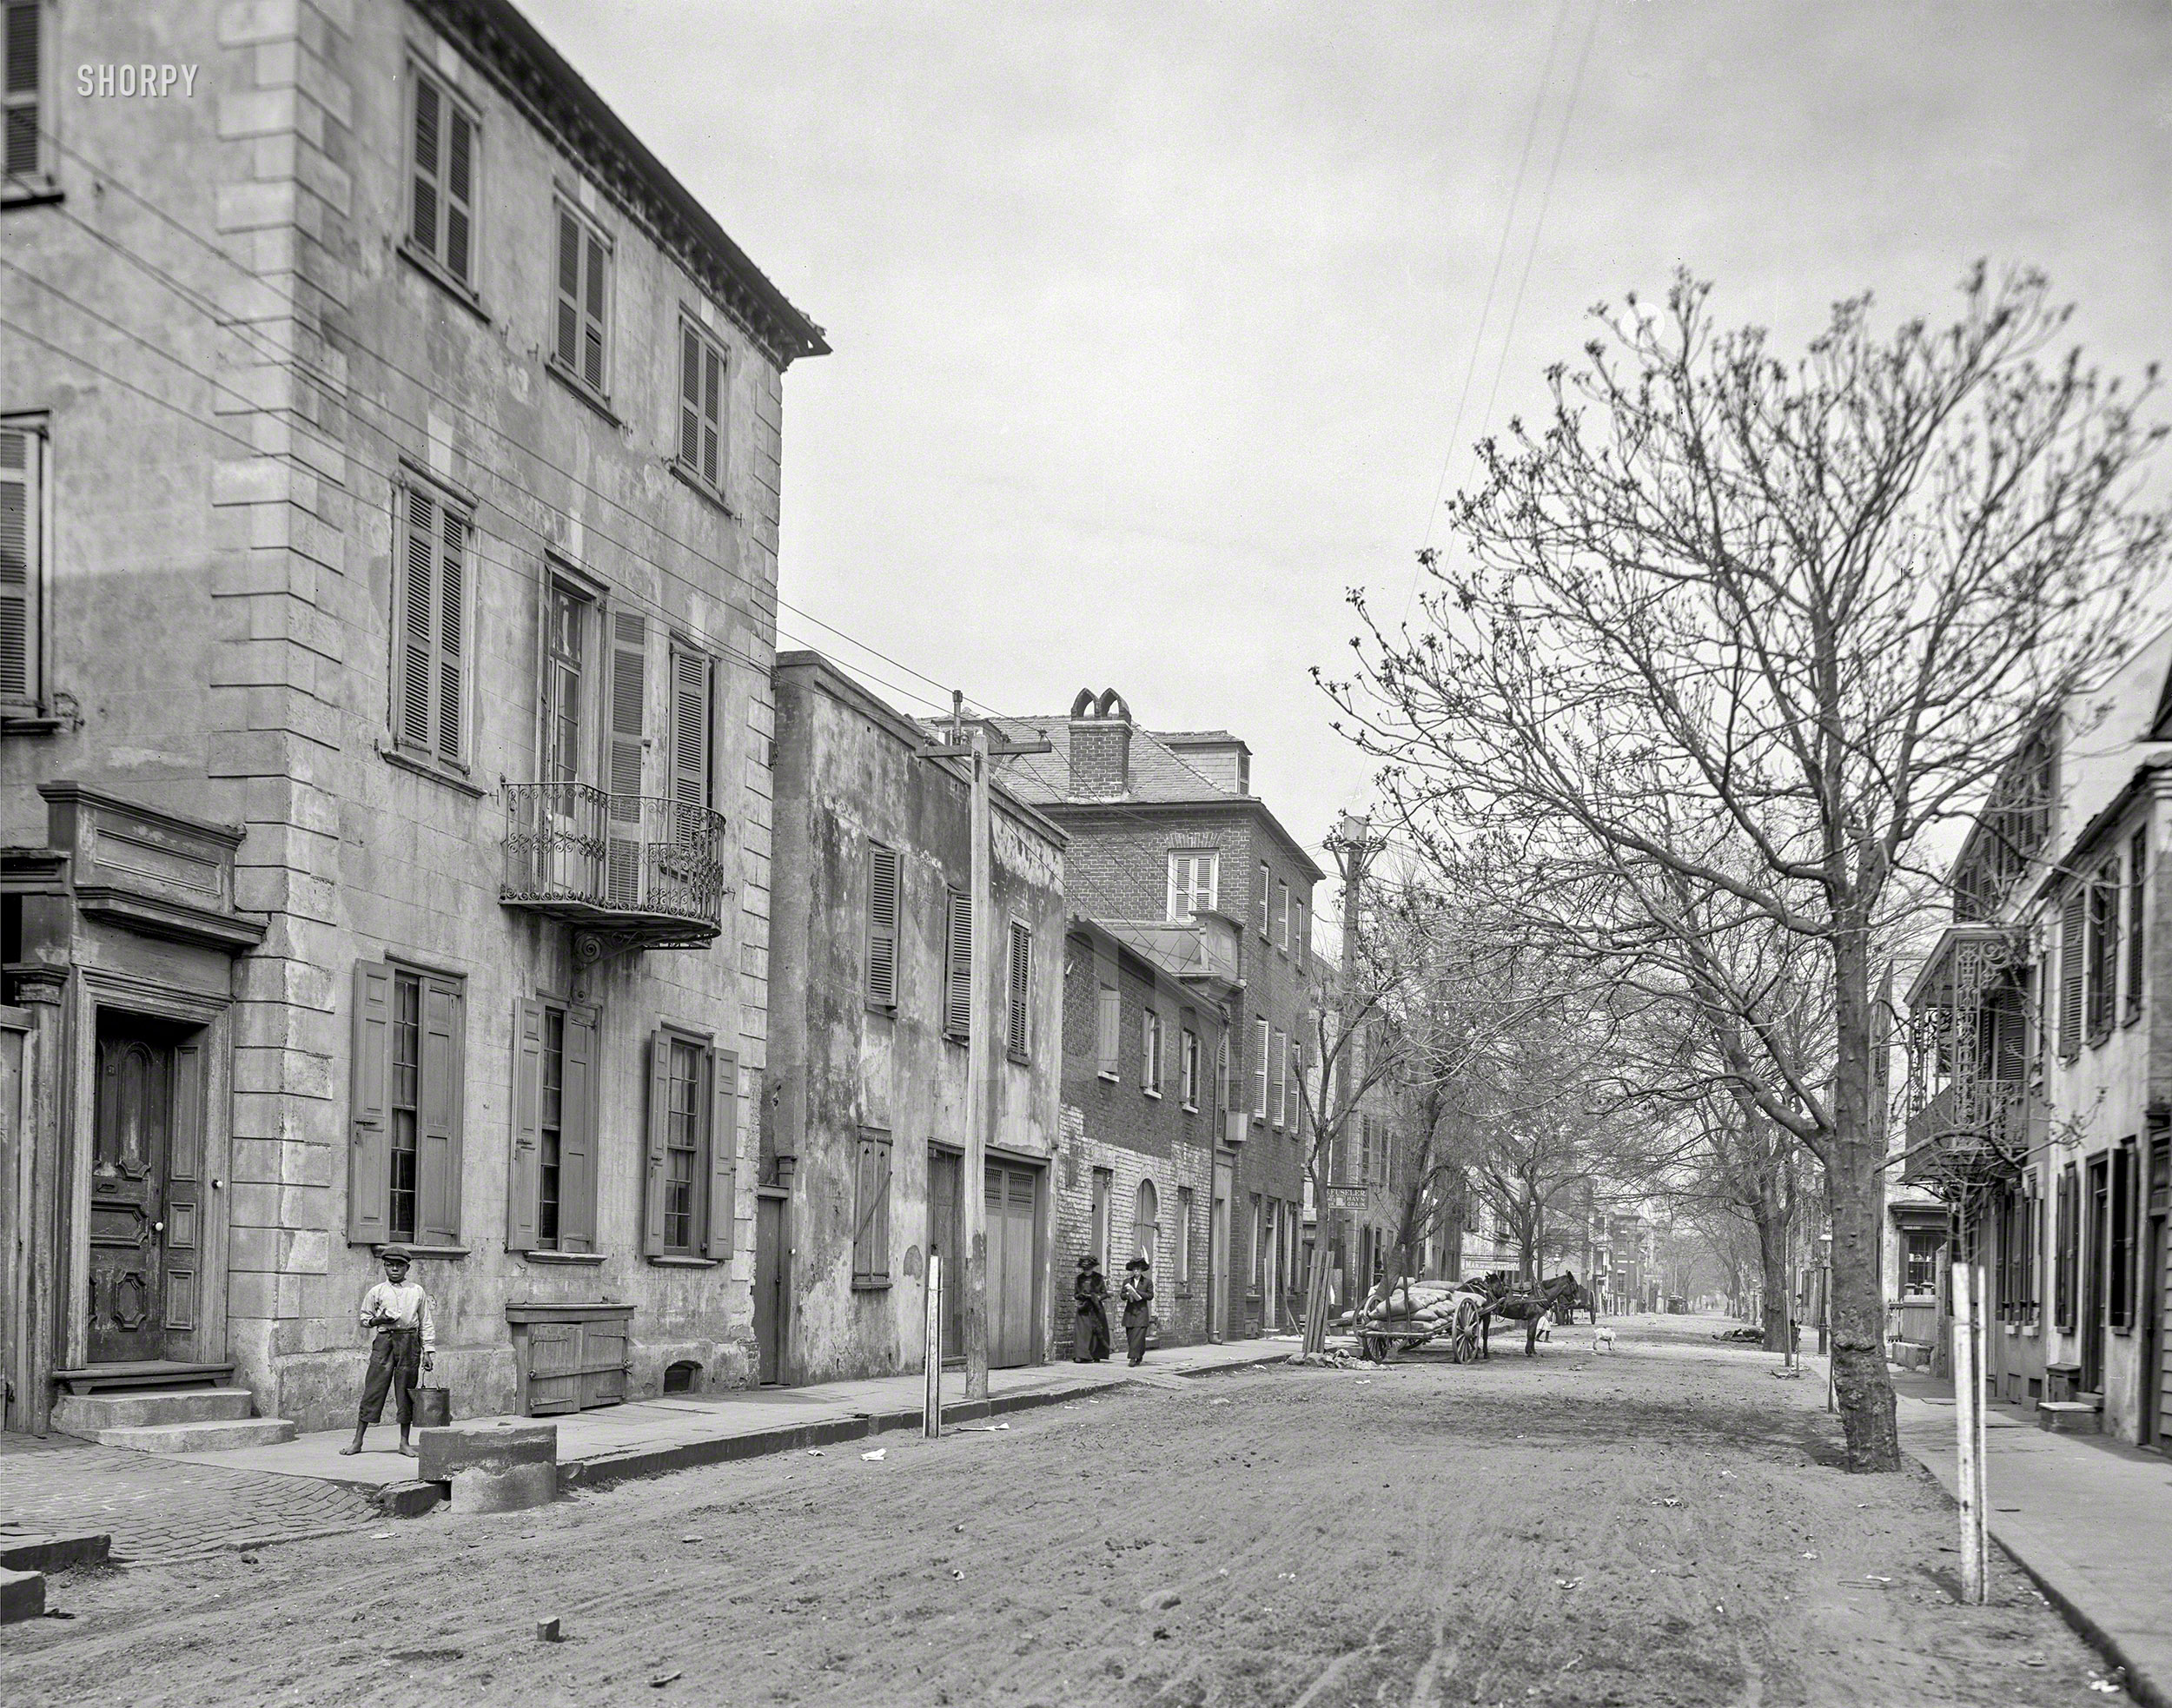 South Carolina circa 1906. "Old Charleston. Church Street just below Tradd Street showing Col. Robert Brewton's house -- No. 71 Church Street at left with piazza." 8x10 inch dry plate glass negative, Detroit Publishing Company. View full size.